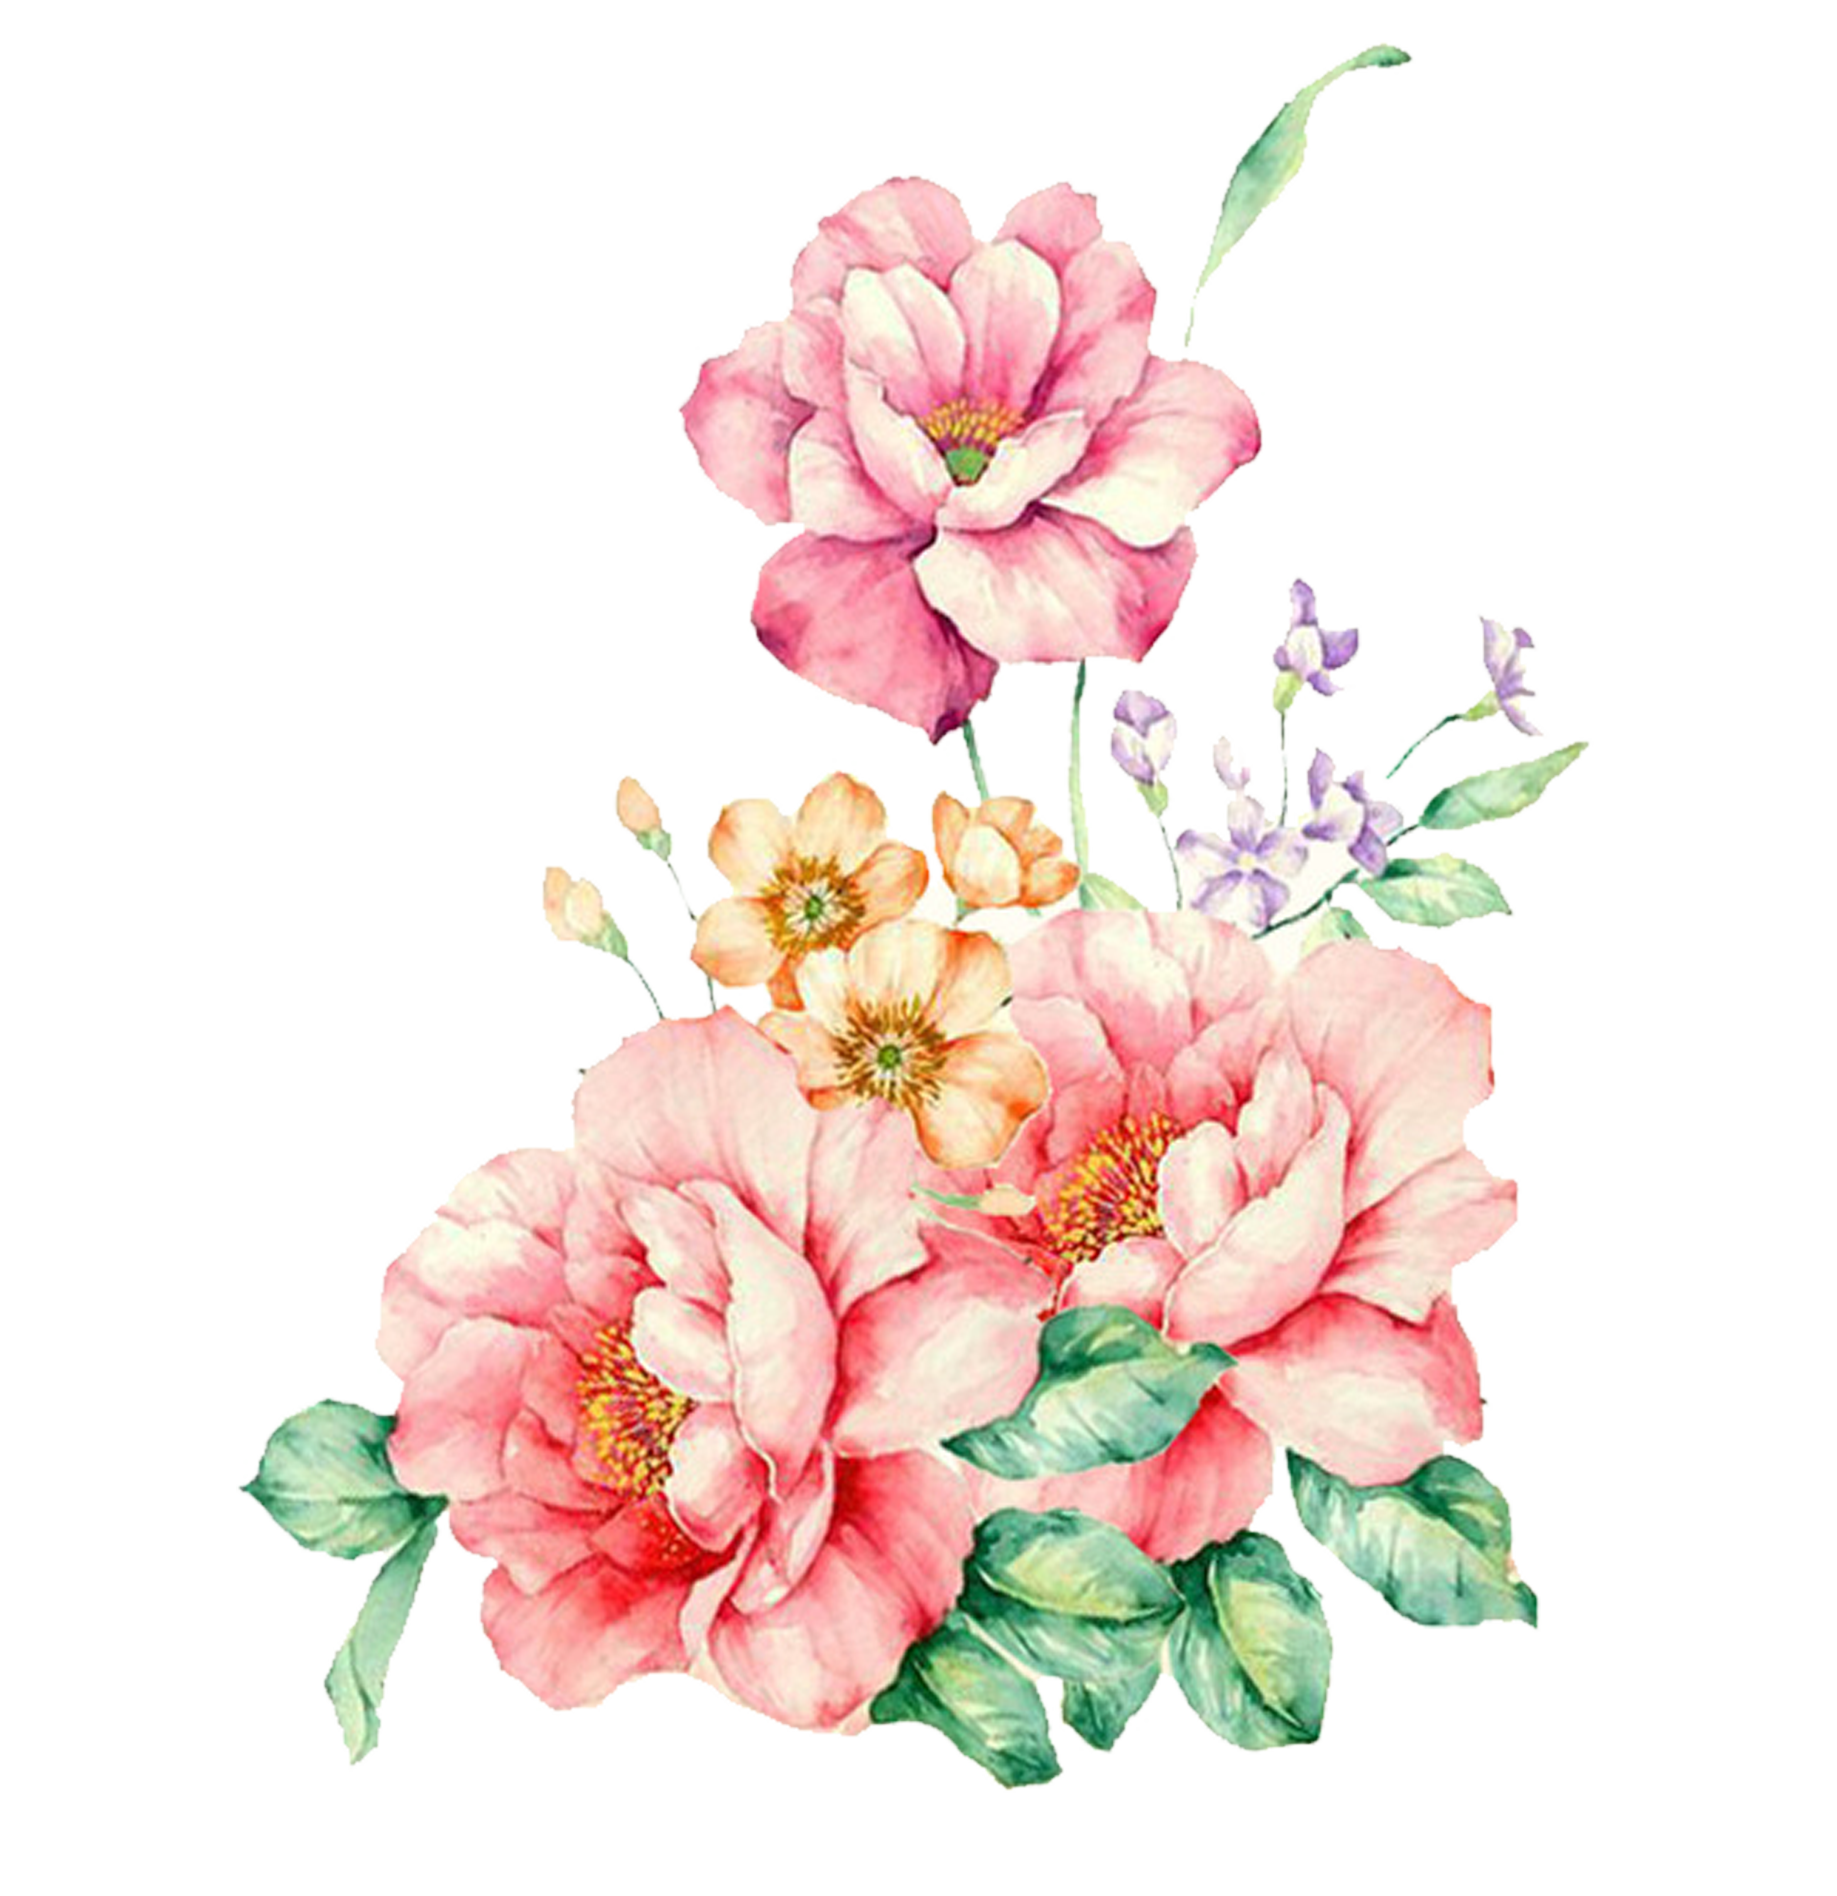 Watercolor Flowers Watercolor Clipart Cartoon Hand Painted Png And